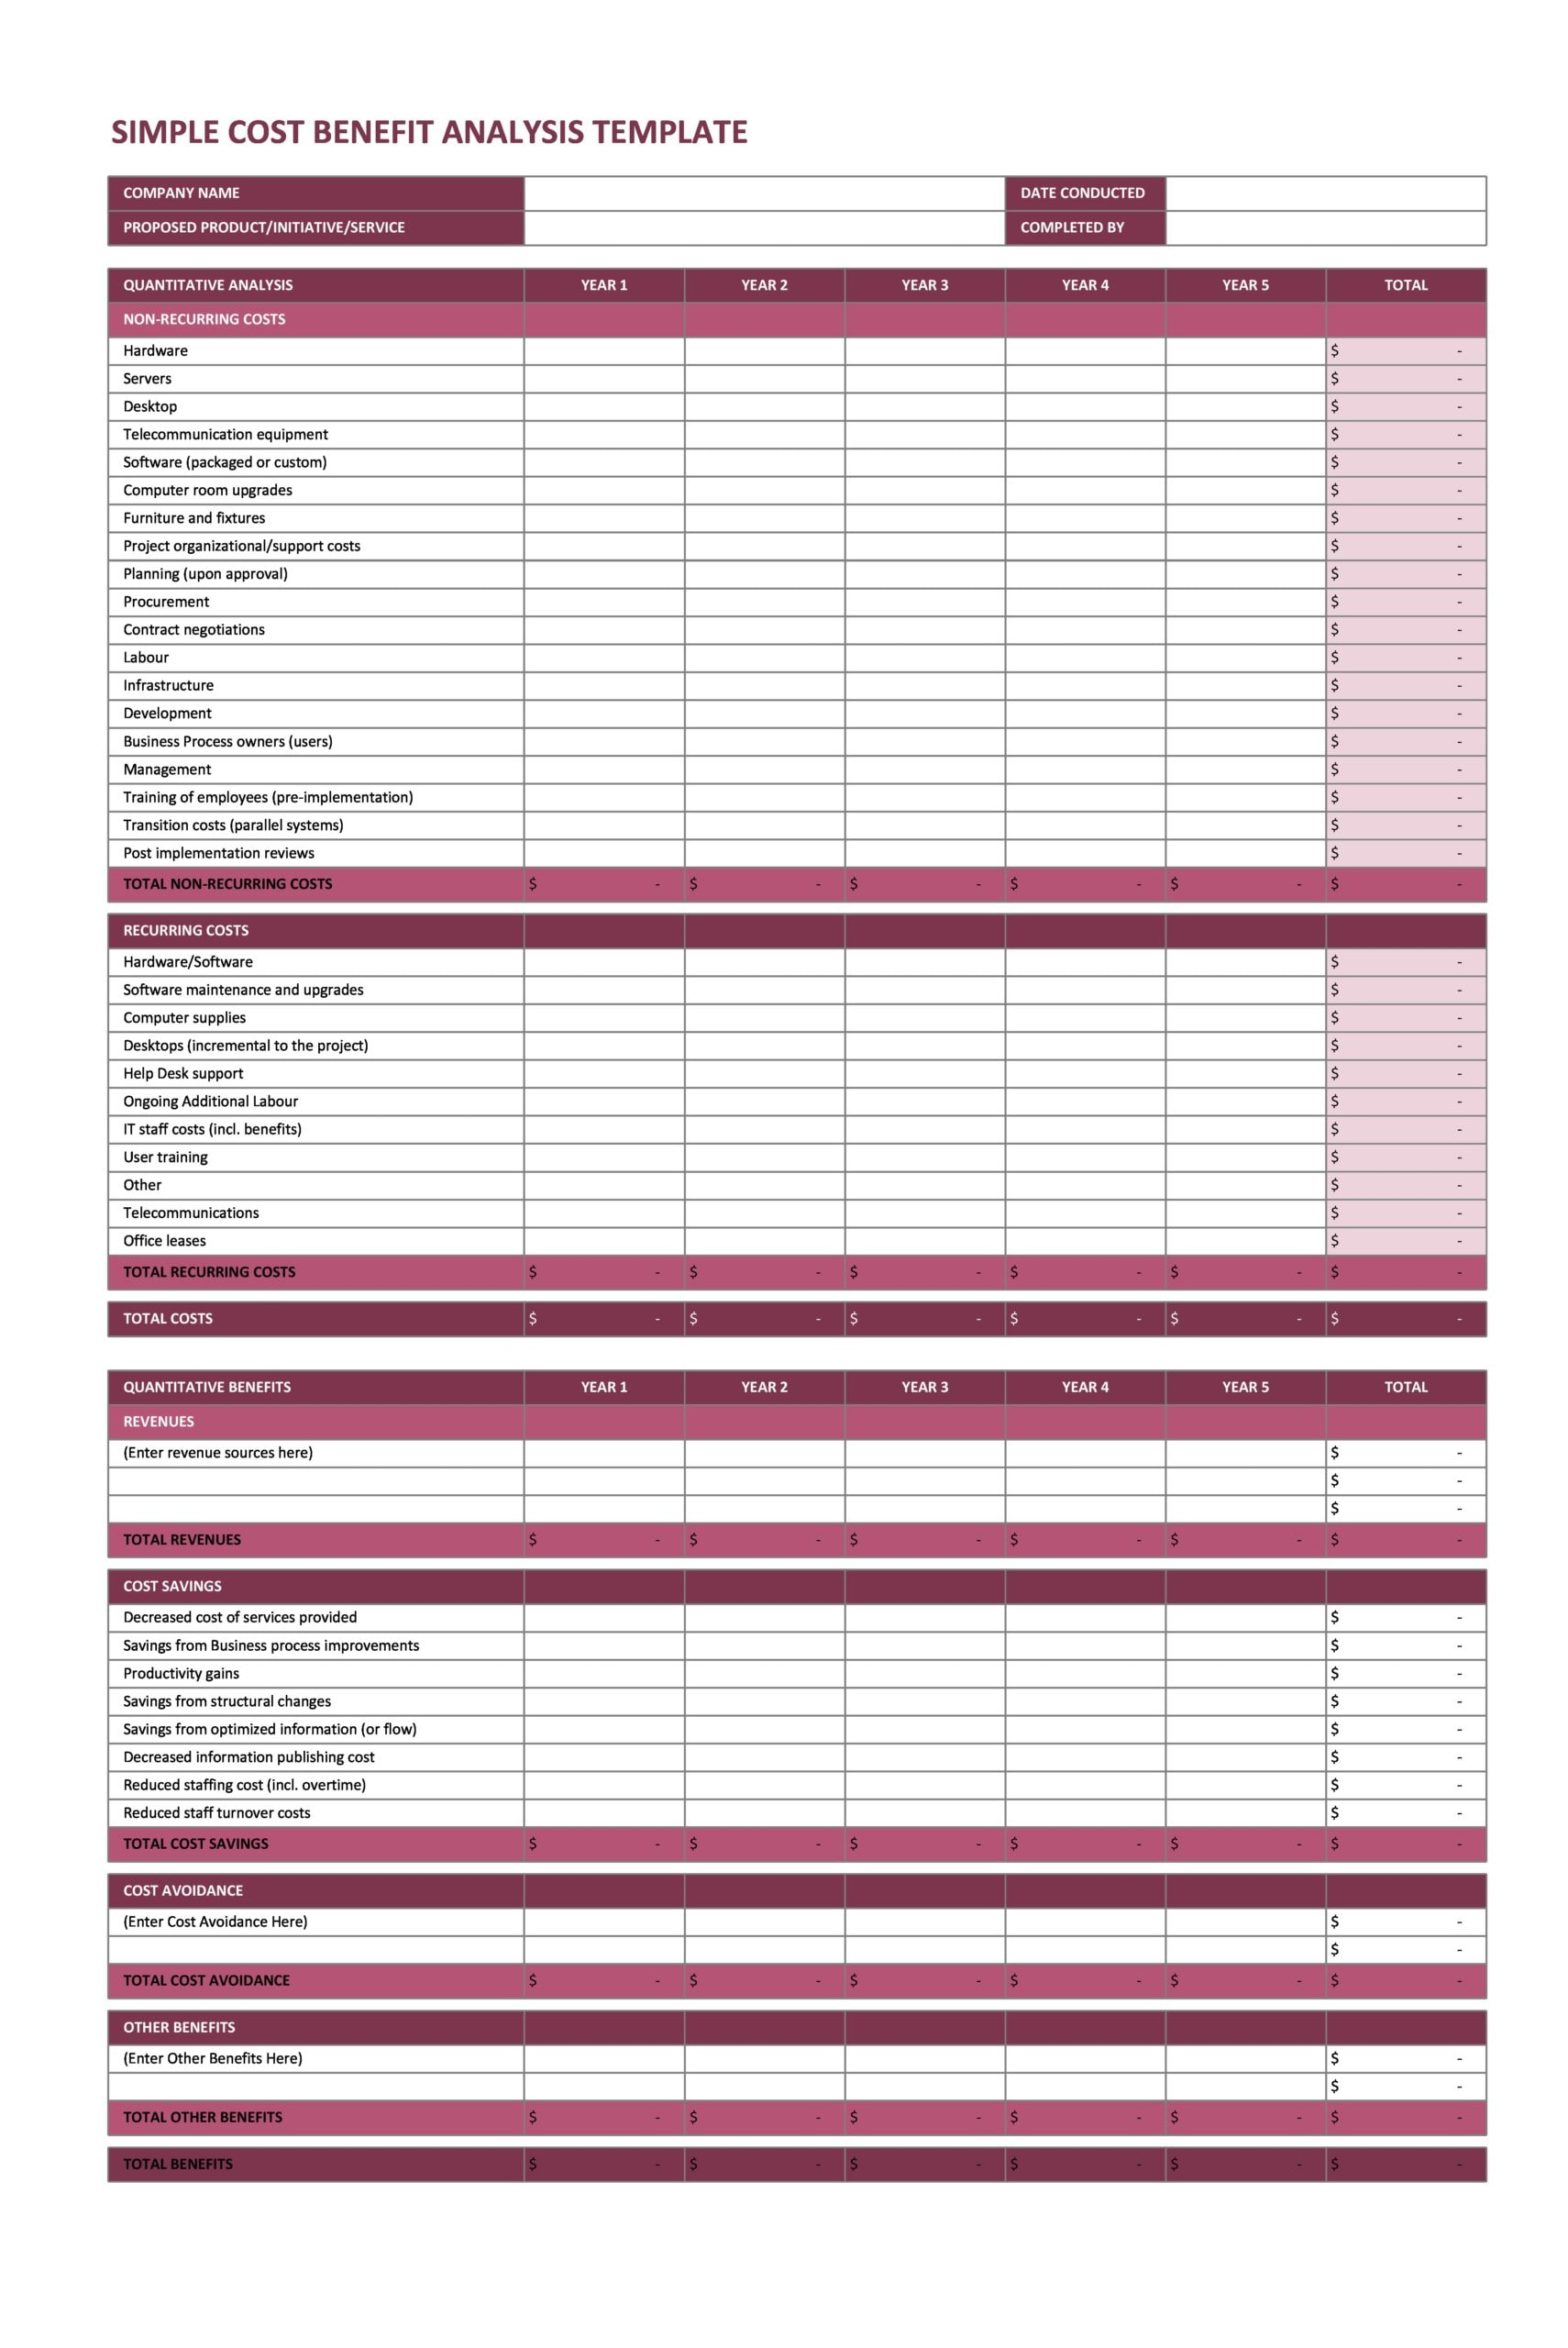 11 Simple Cost Benefit Analysis Templates (Word/Excel) Regarding Product Cost Analysis Template Inside Product Cost Analysis Template